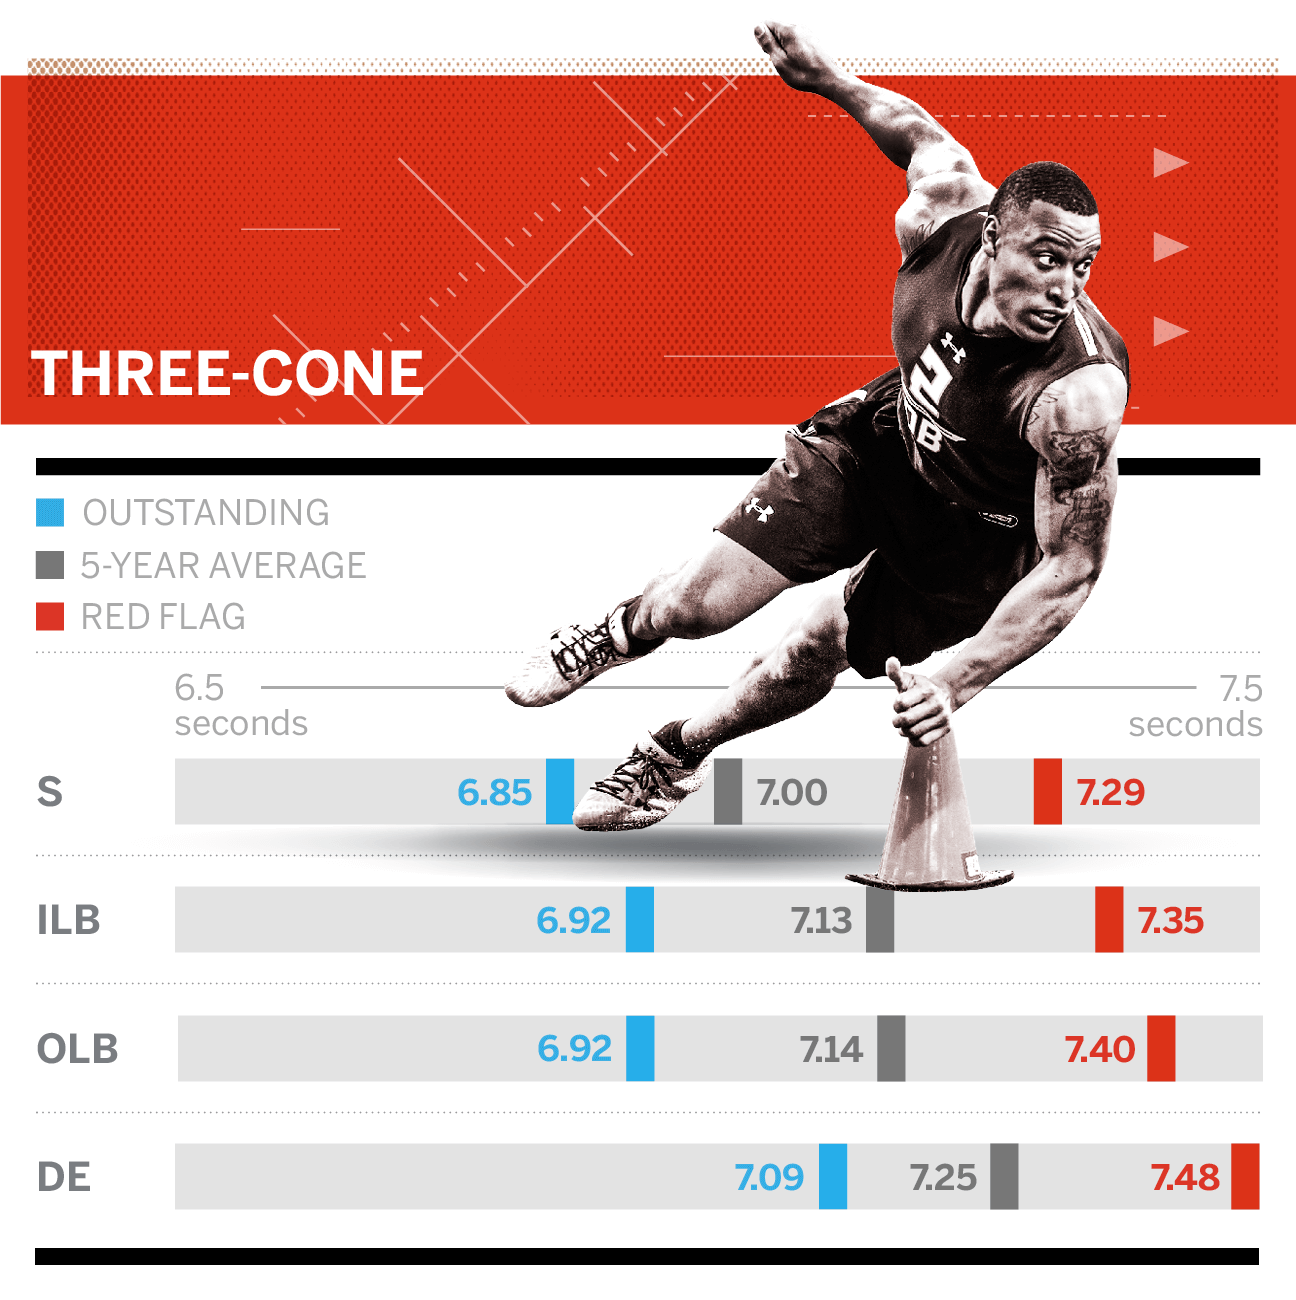 NFL combine: 3 cone drill, shuttle and other drills explained